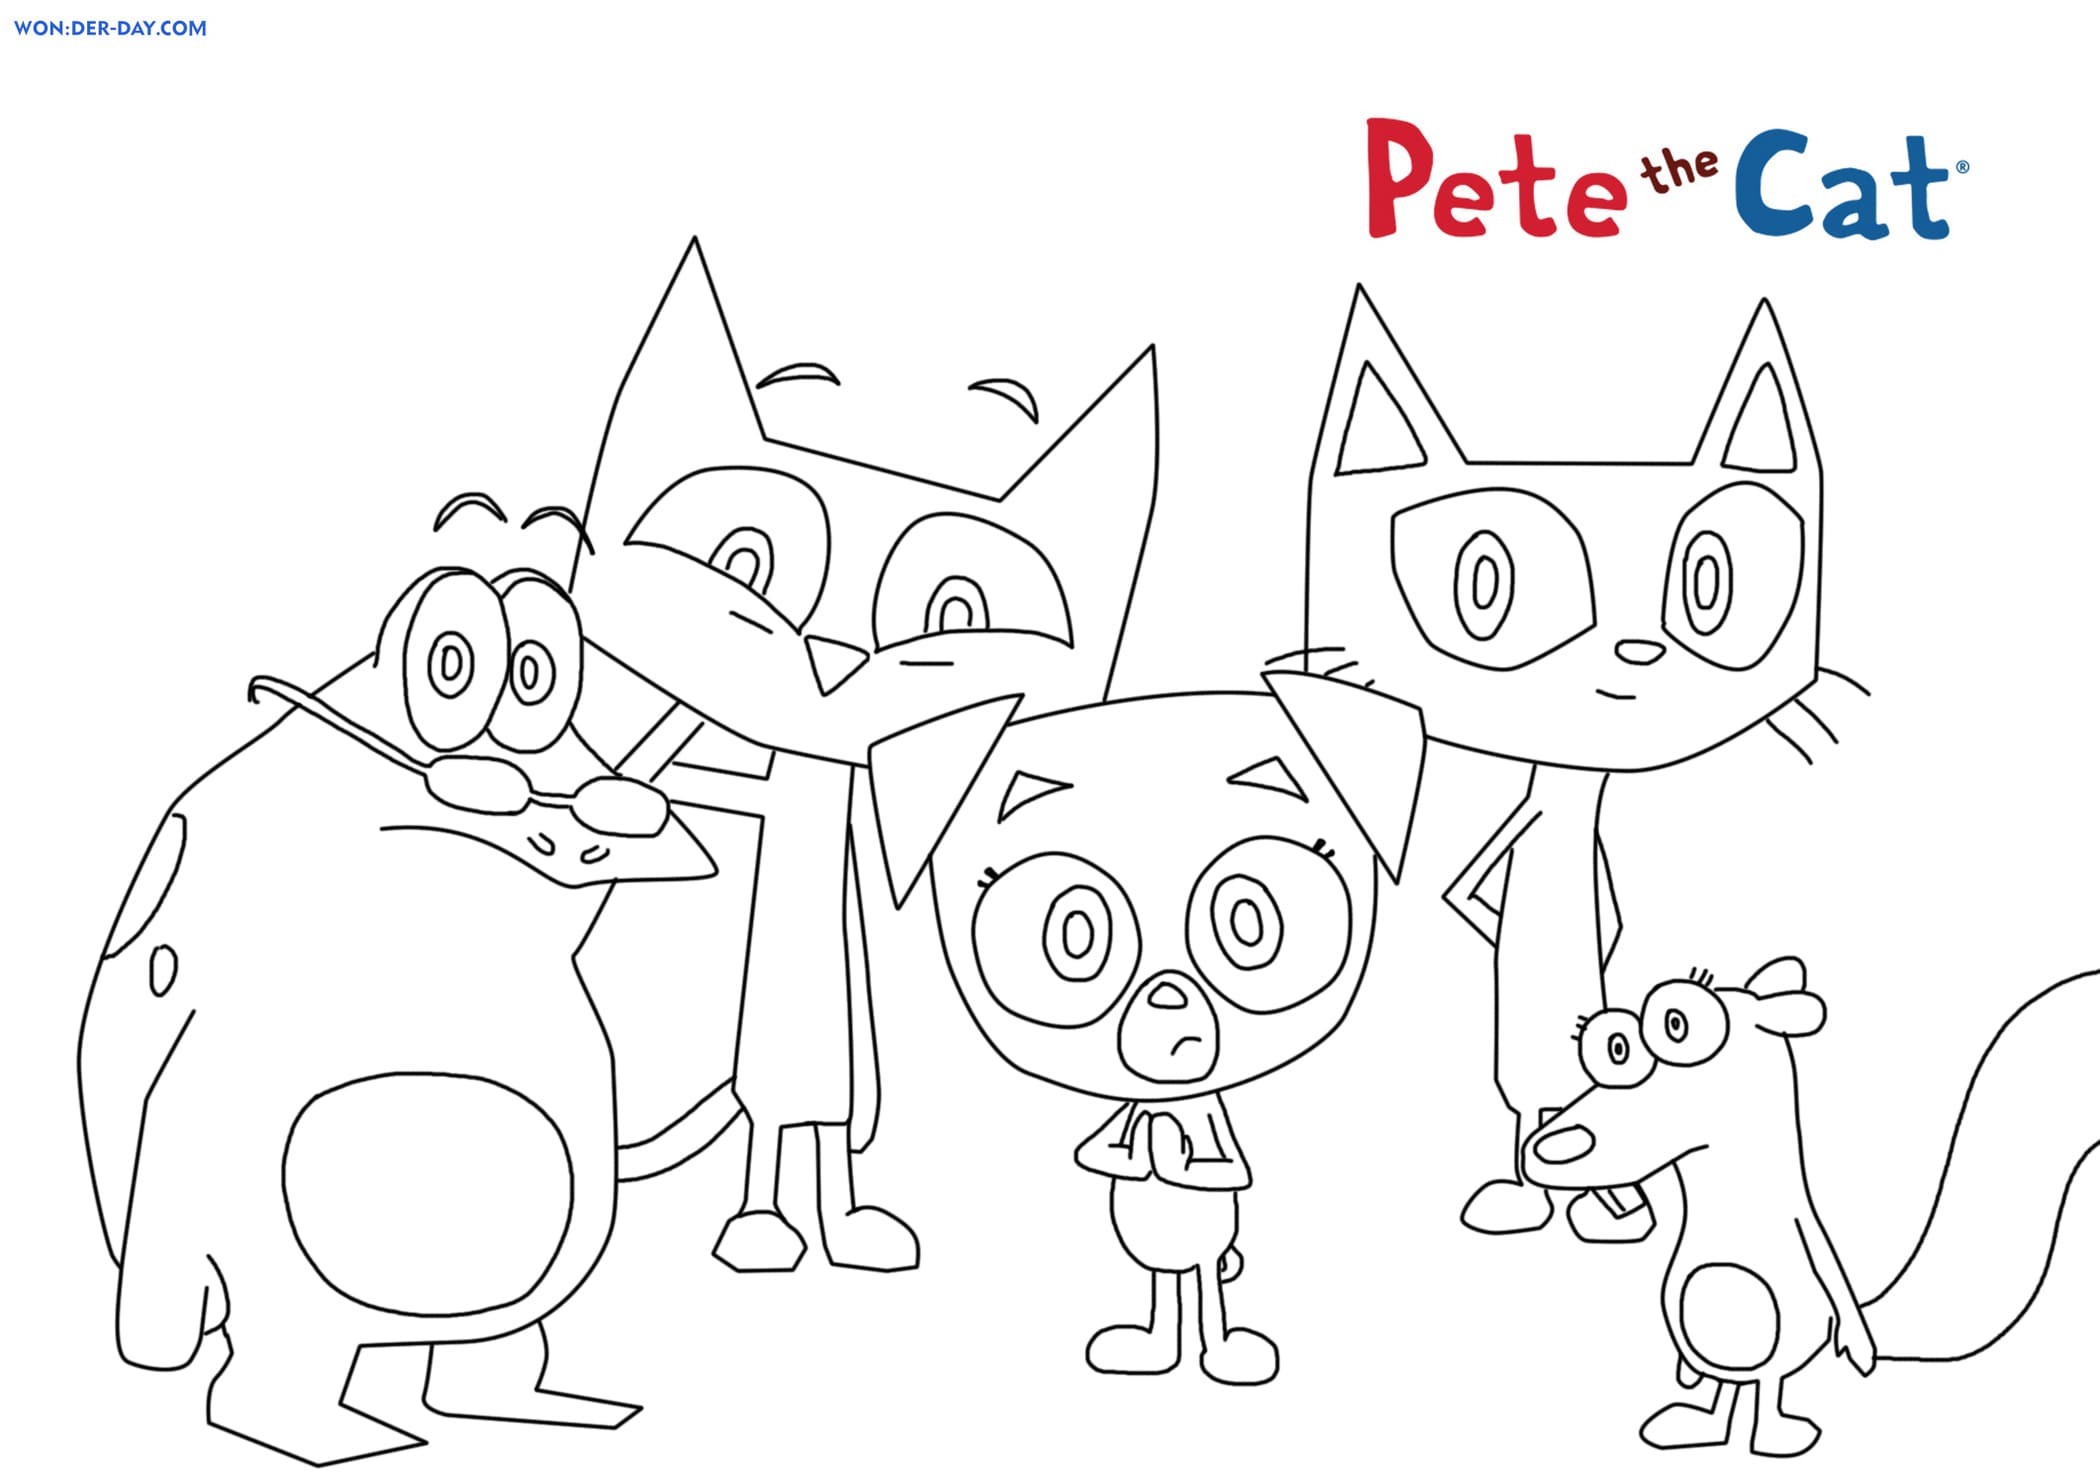 Pete the cat coloring pages free coloring pages wonder day â coloring pages for children and adults